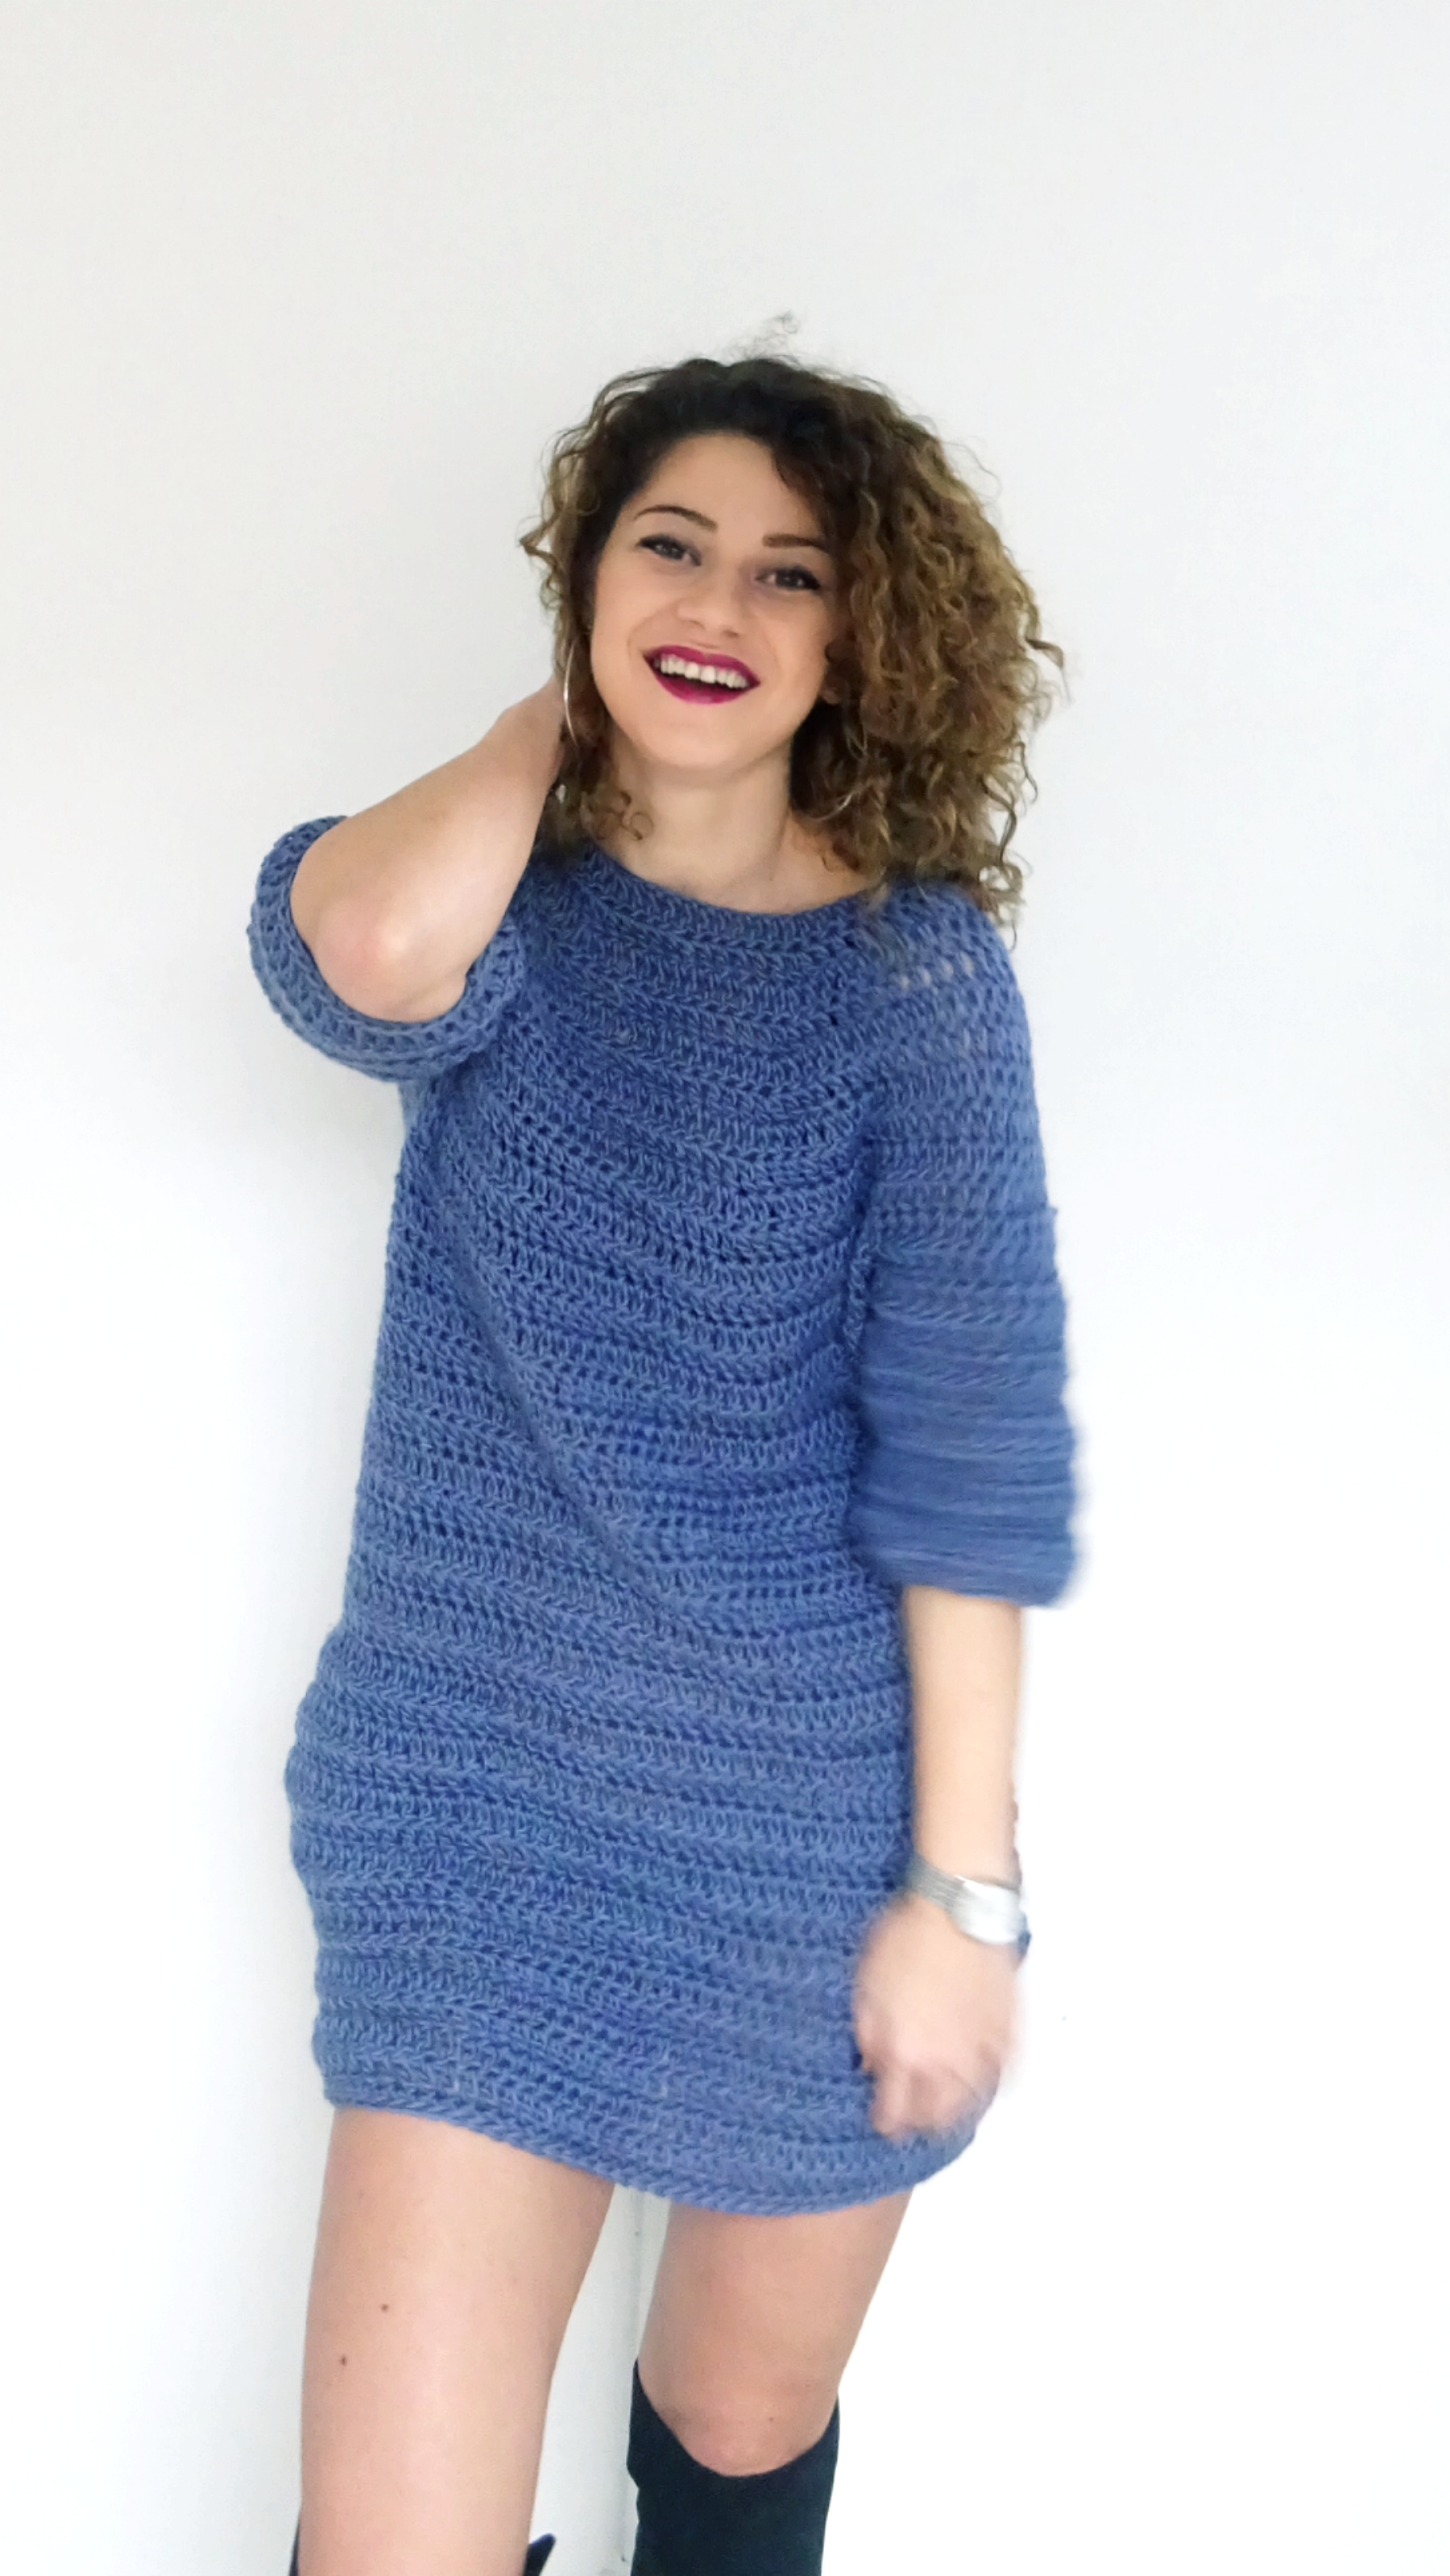 Delighted Sweater - Dress